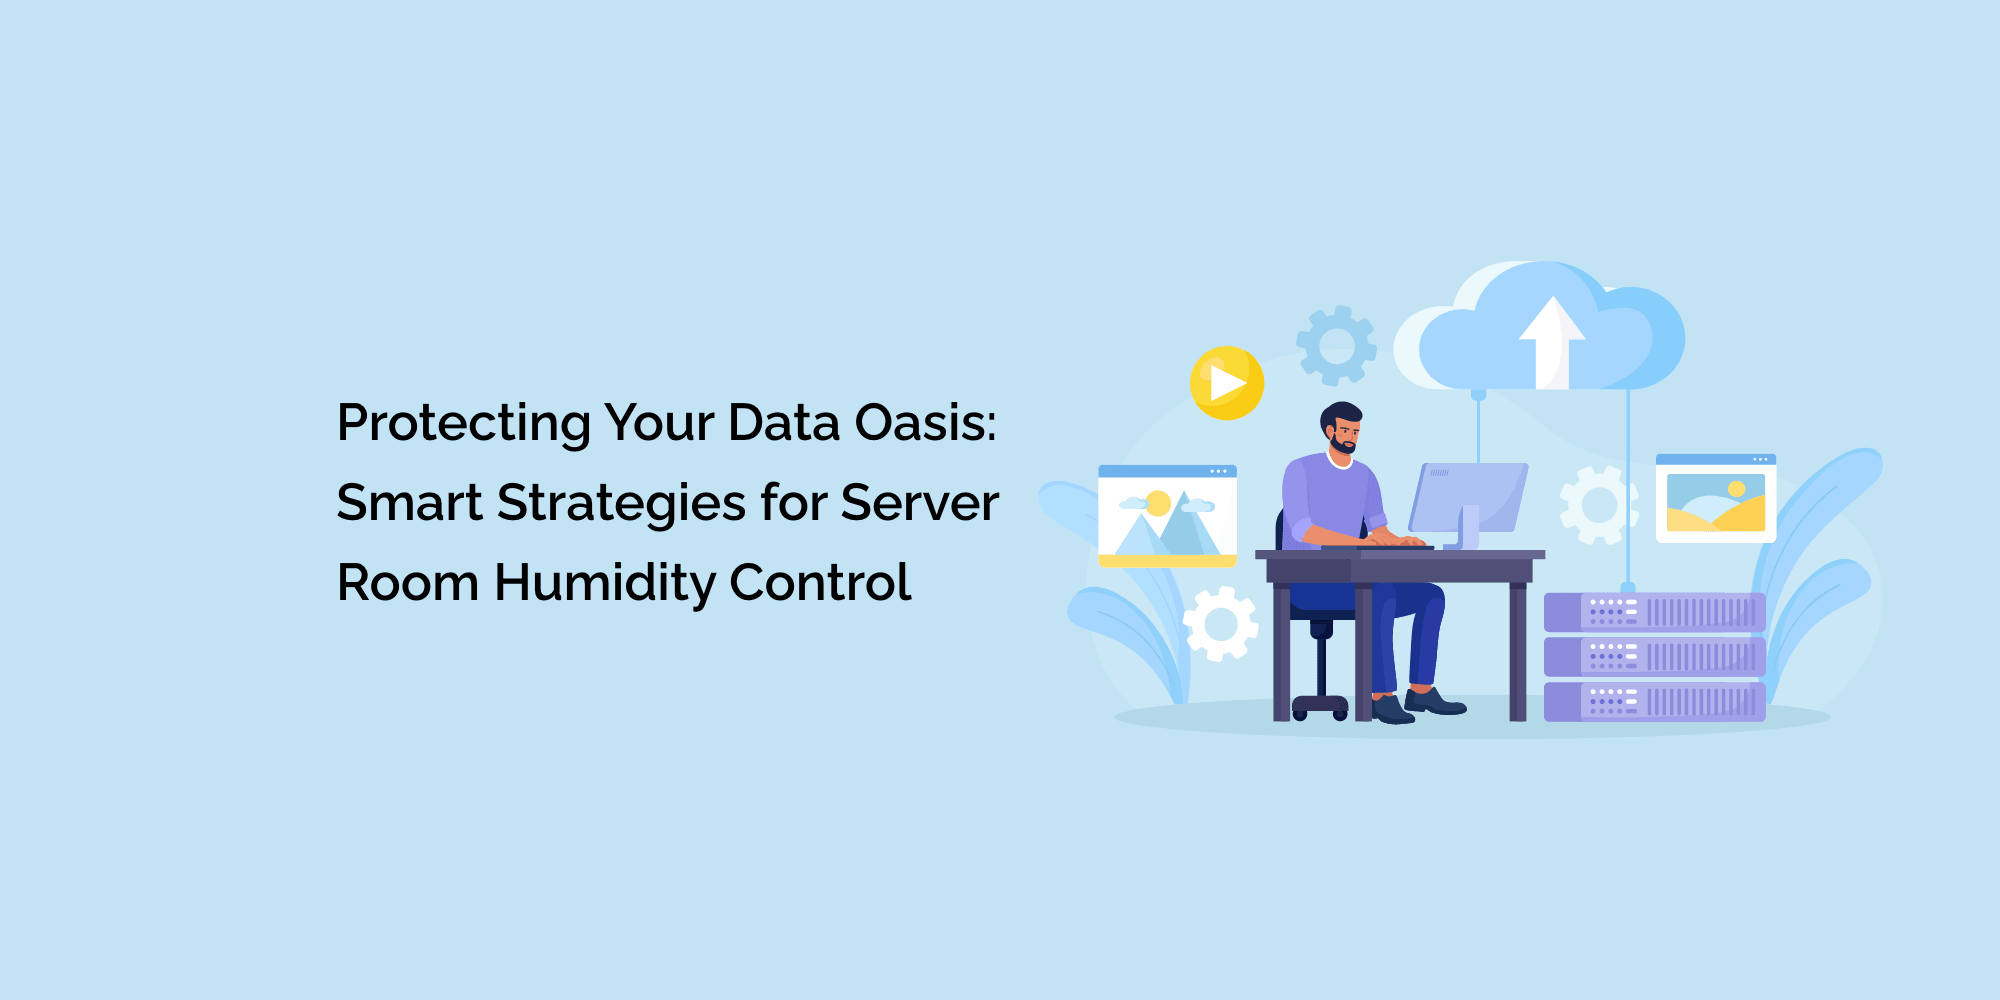 Protecting Your Data Oasis: Smart Strategies for Server Room Humidity Control